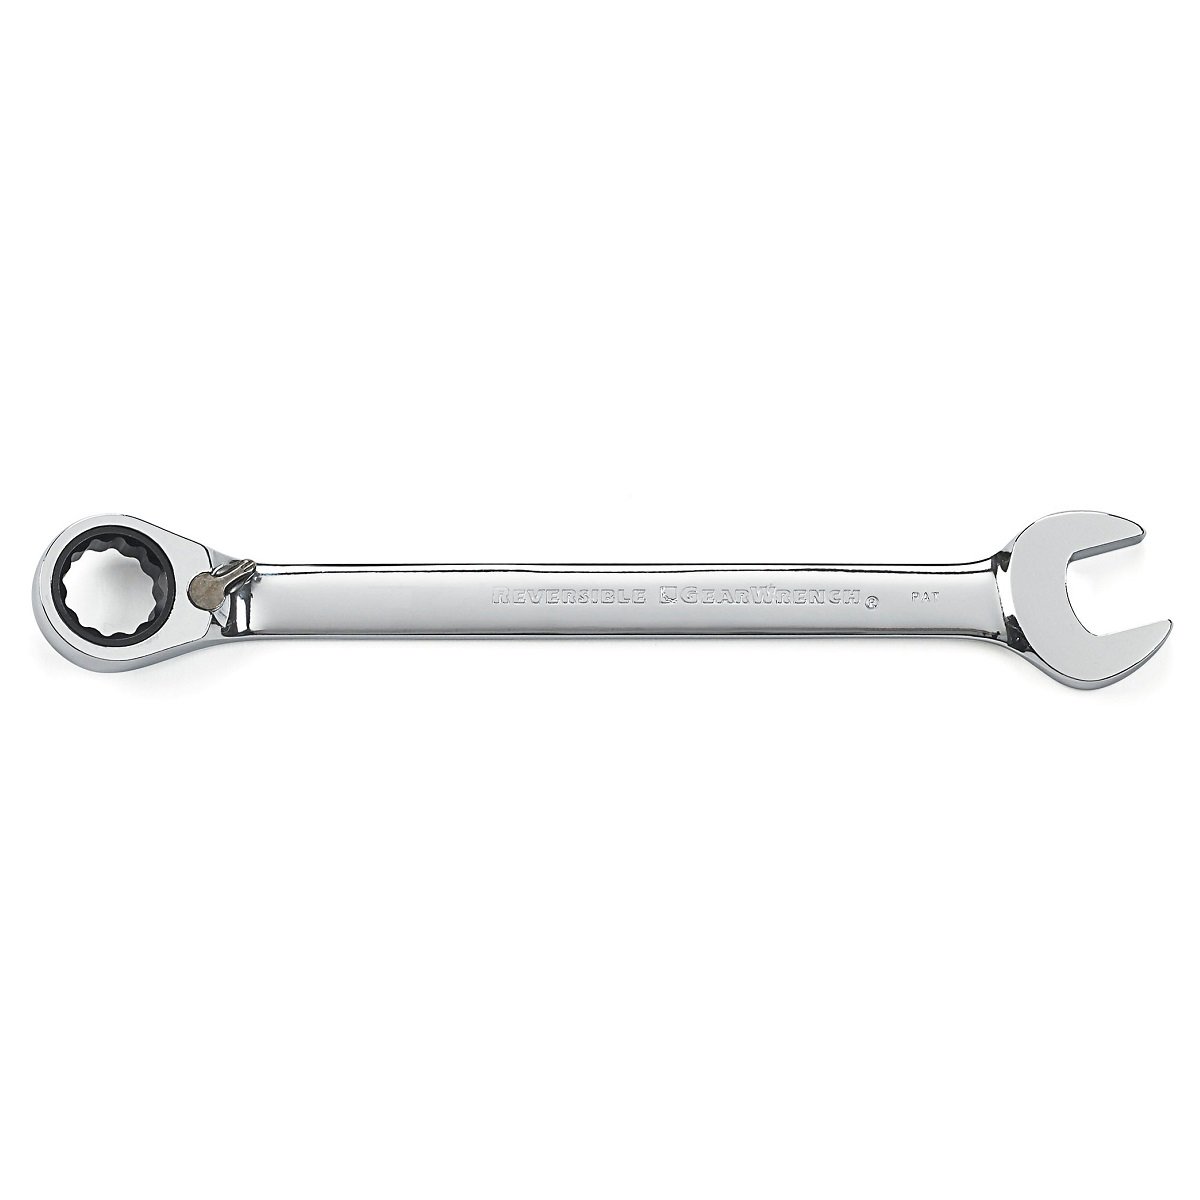 GearWrench 14mm Reversible Combination Ratcheting Wrench Spanner 9614N